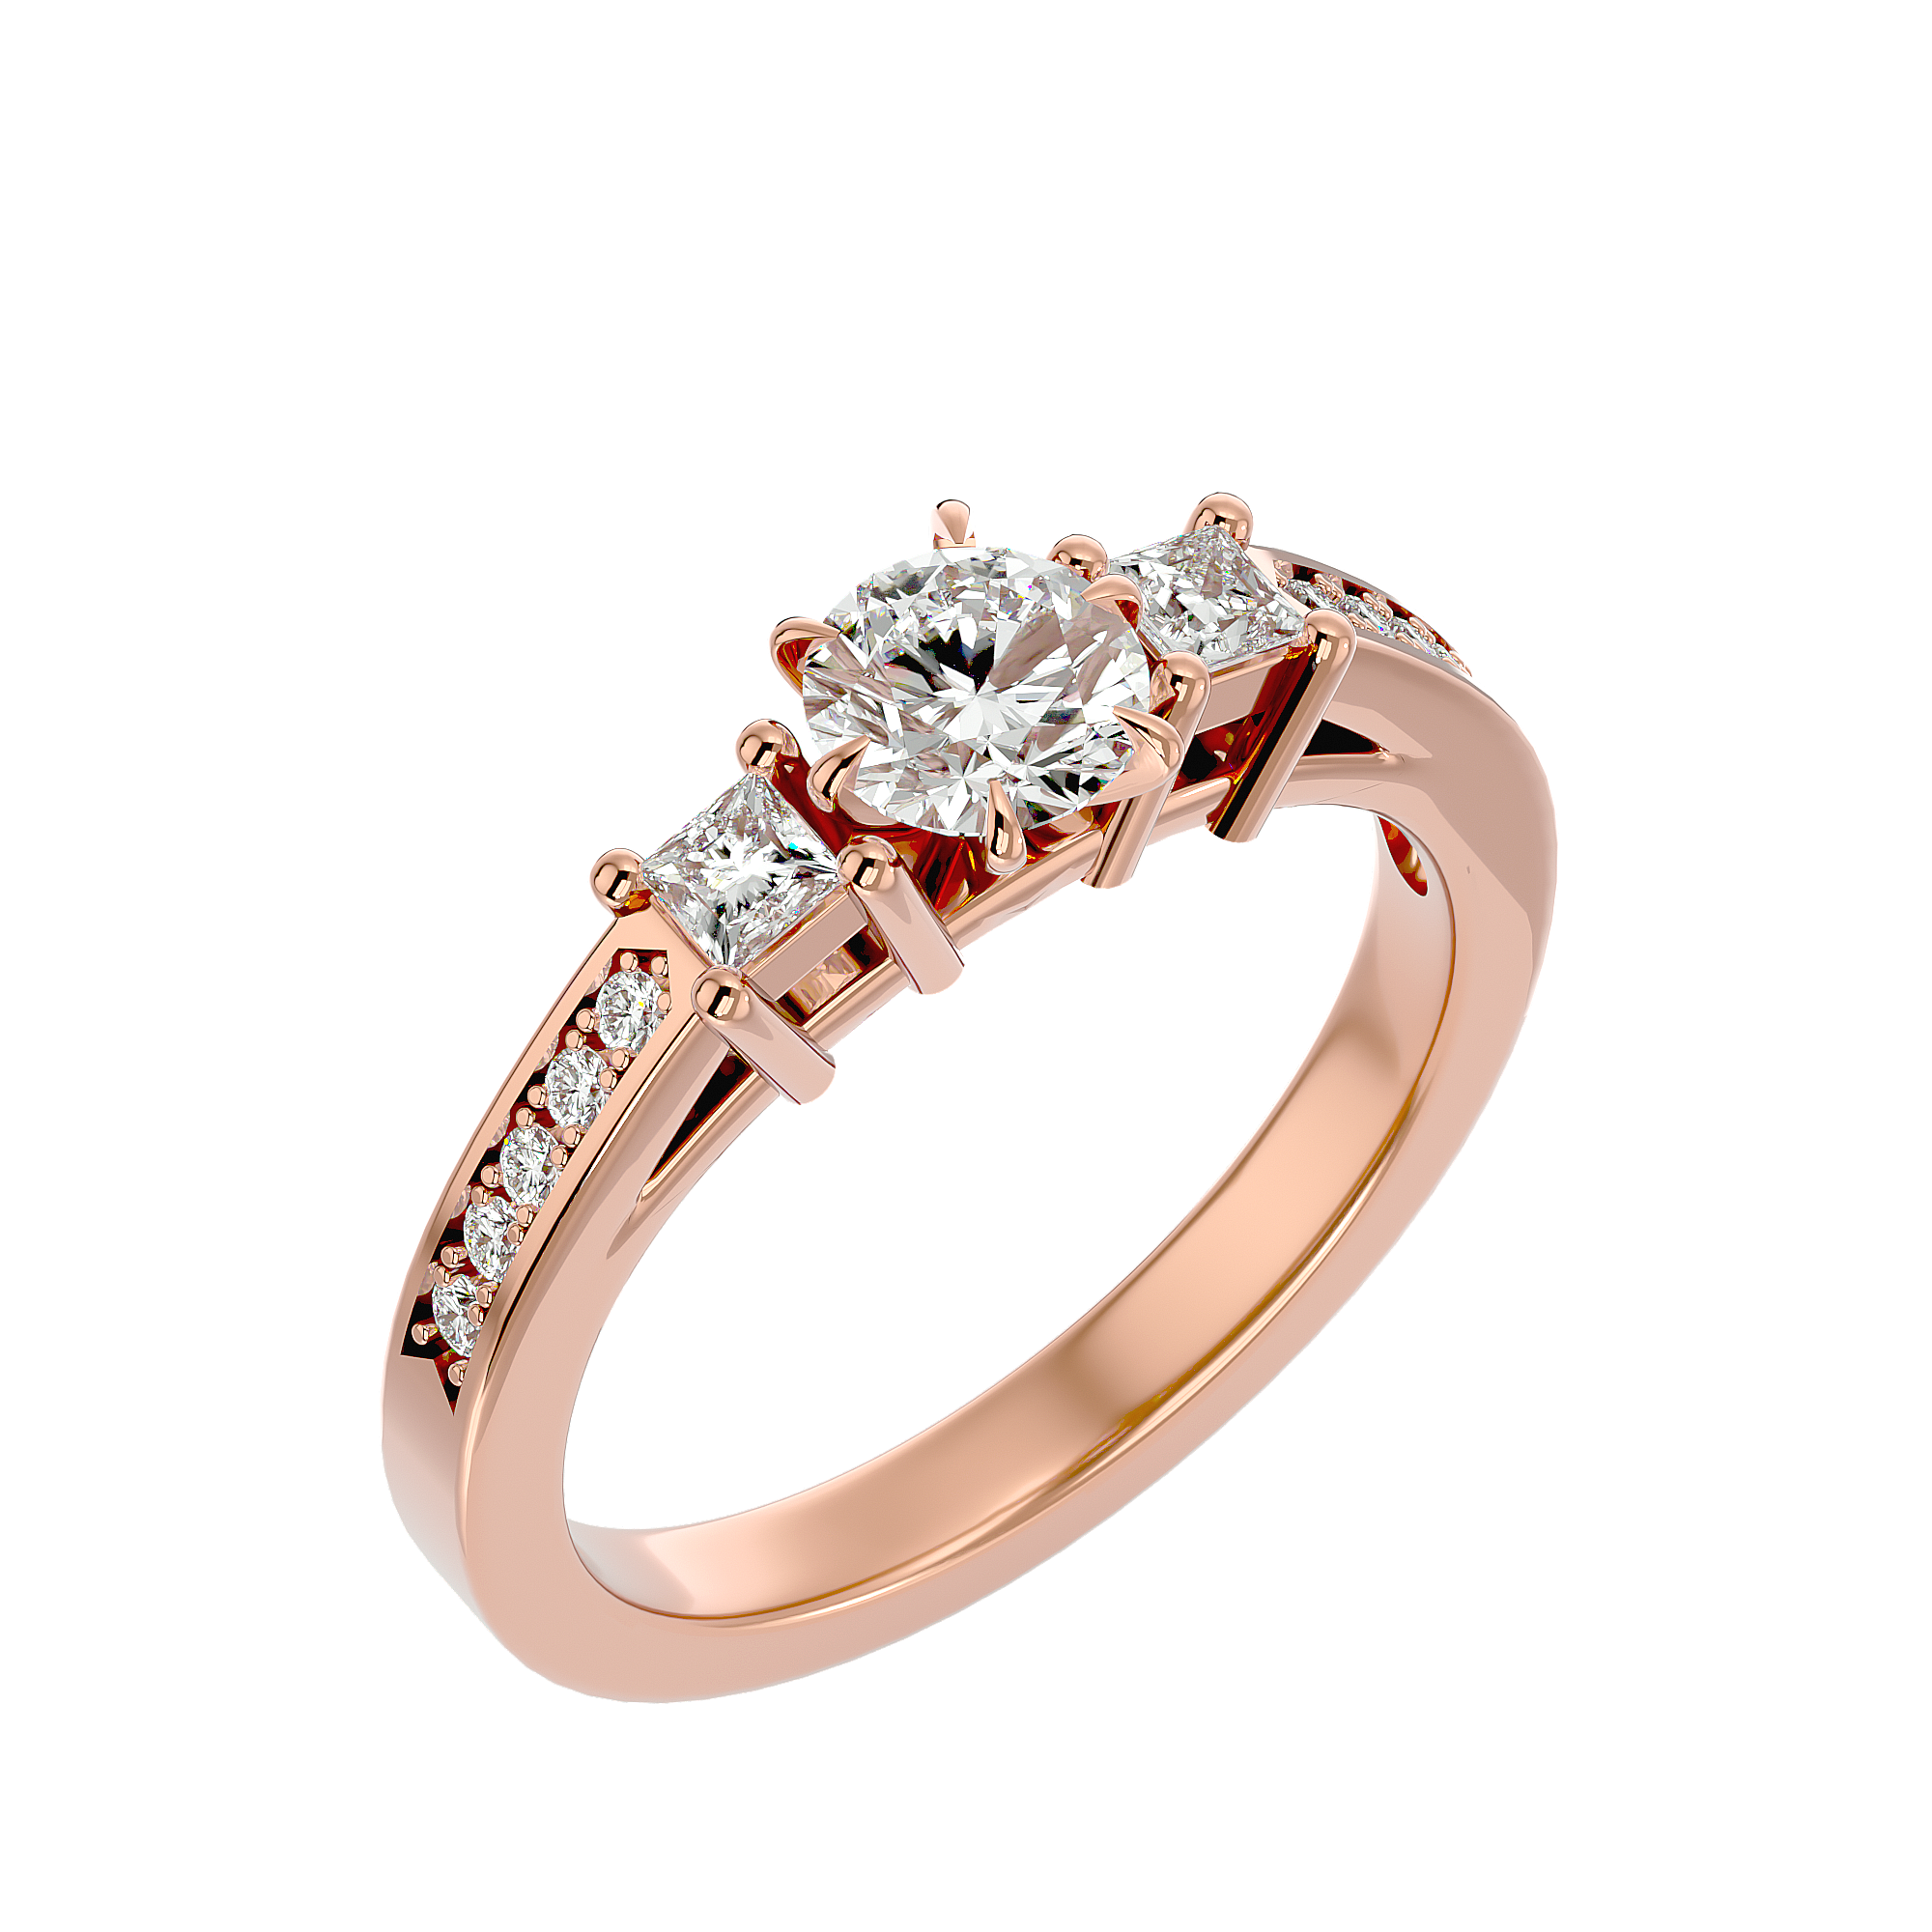 Ionian Solitaire Lab Grown Diamond Ring